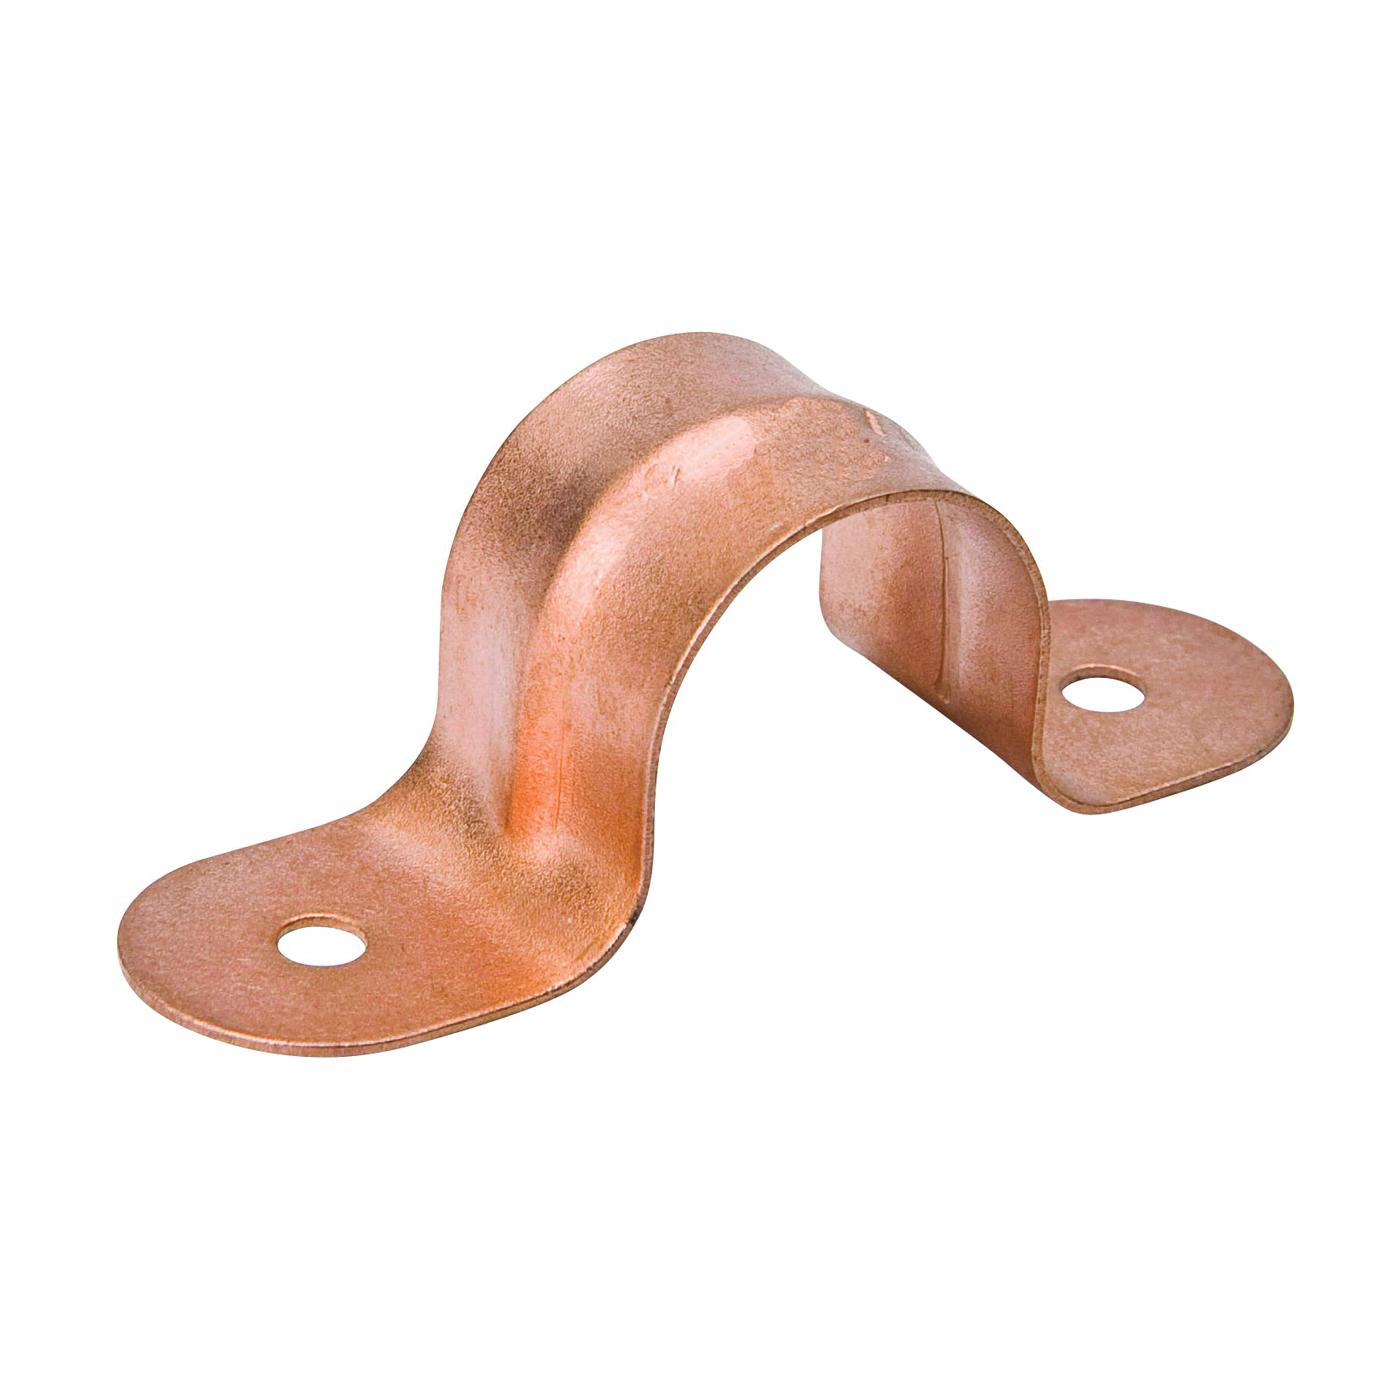 C13-200HC Pipe Strap, 2 in Opening, Steel